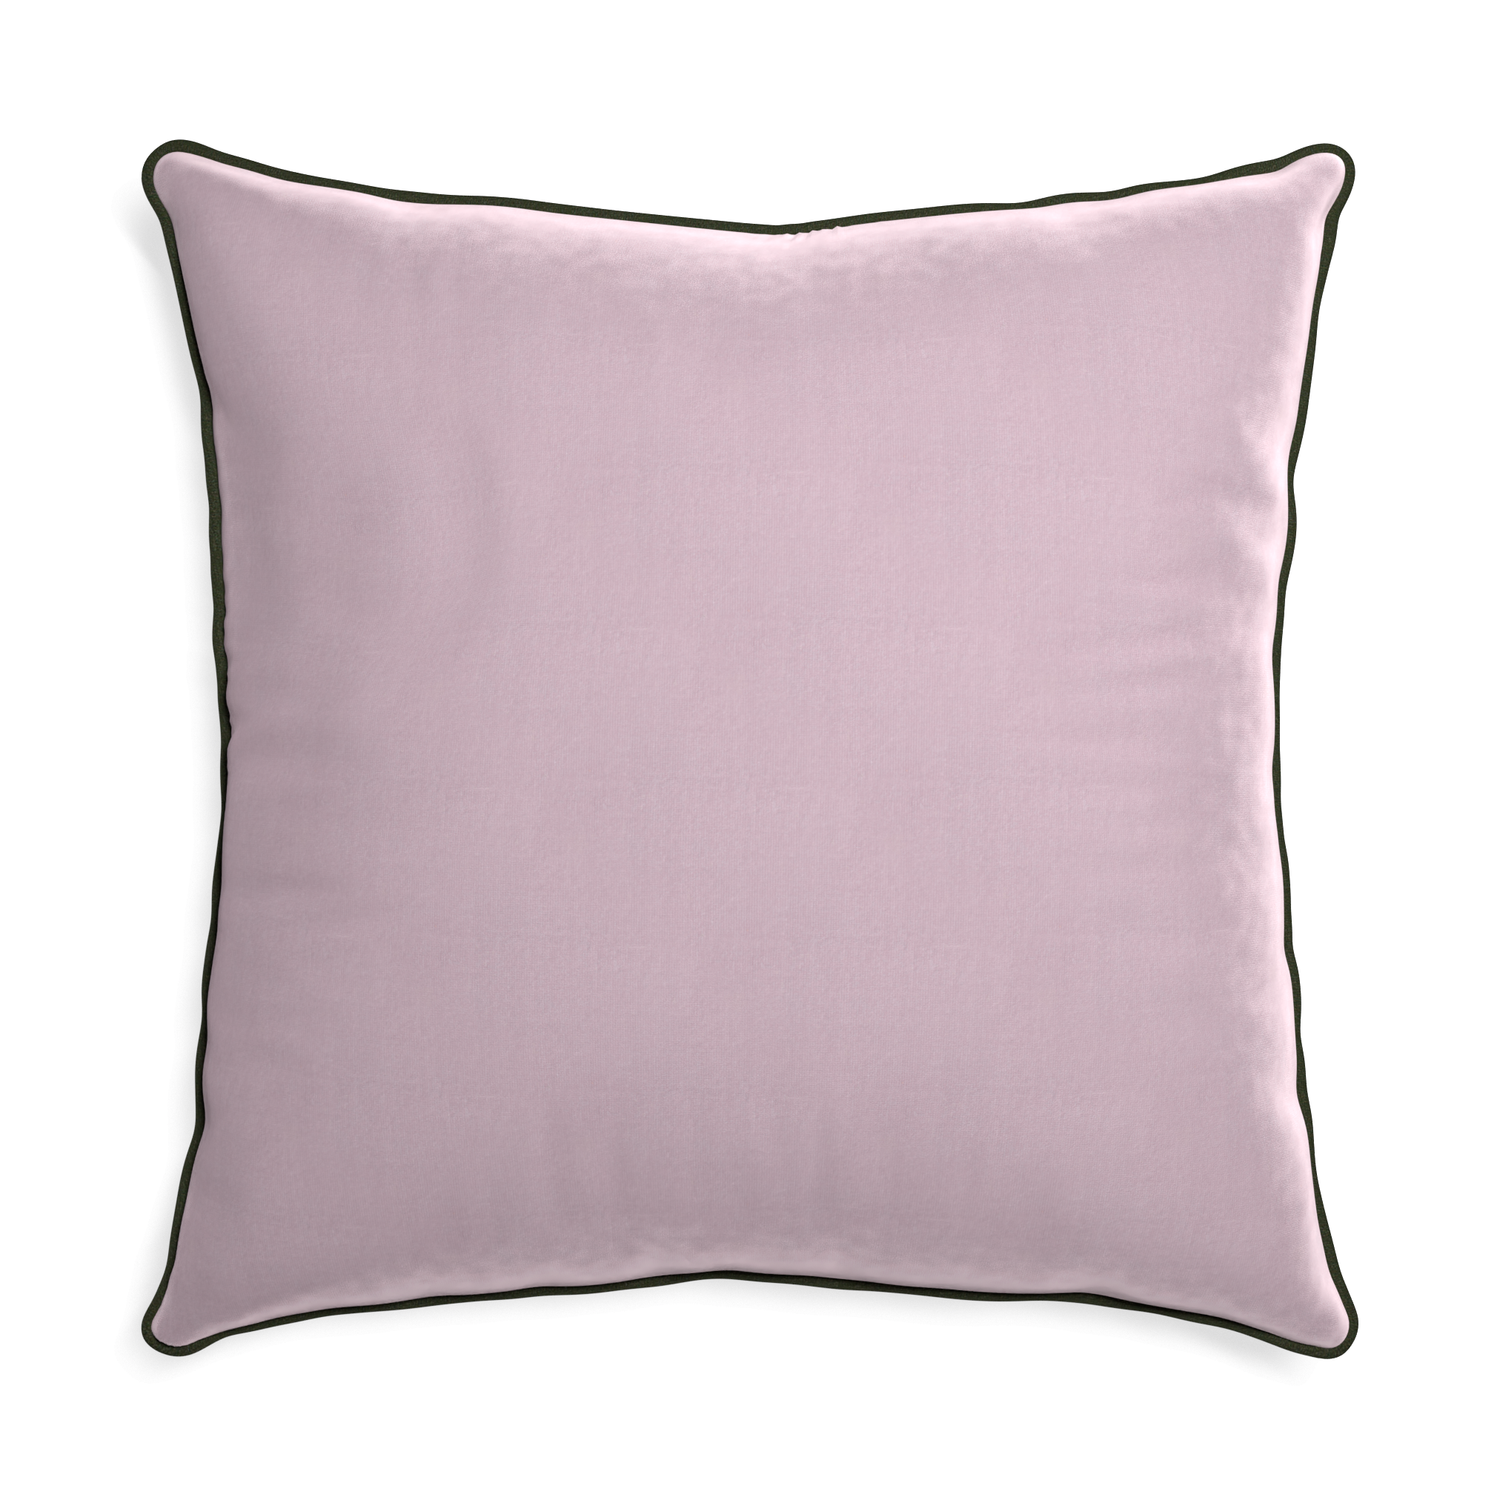 Euro-sham lilac velvet custom lilacpillow with f piping on white background